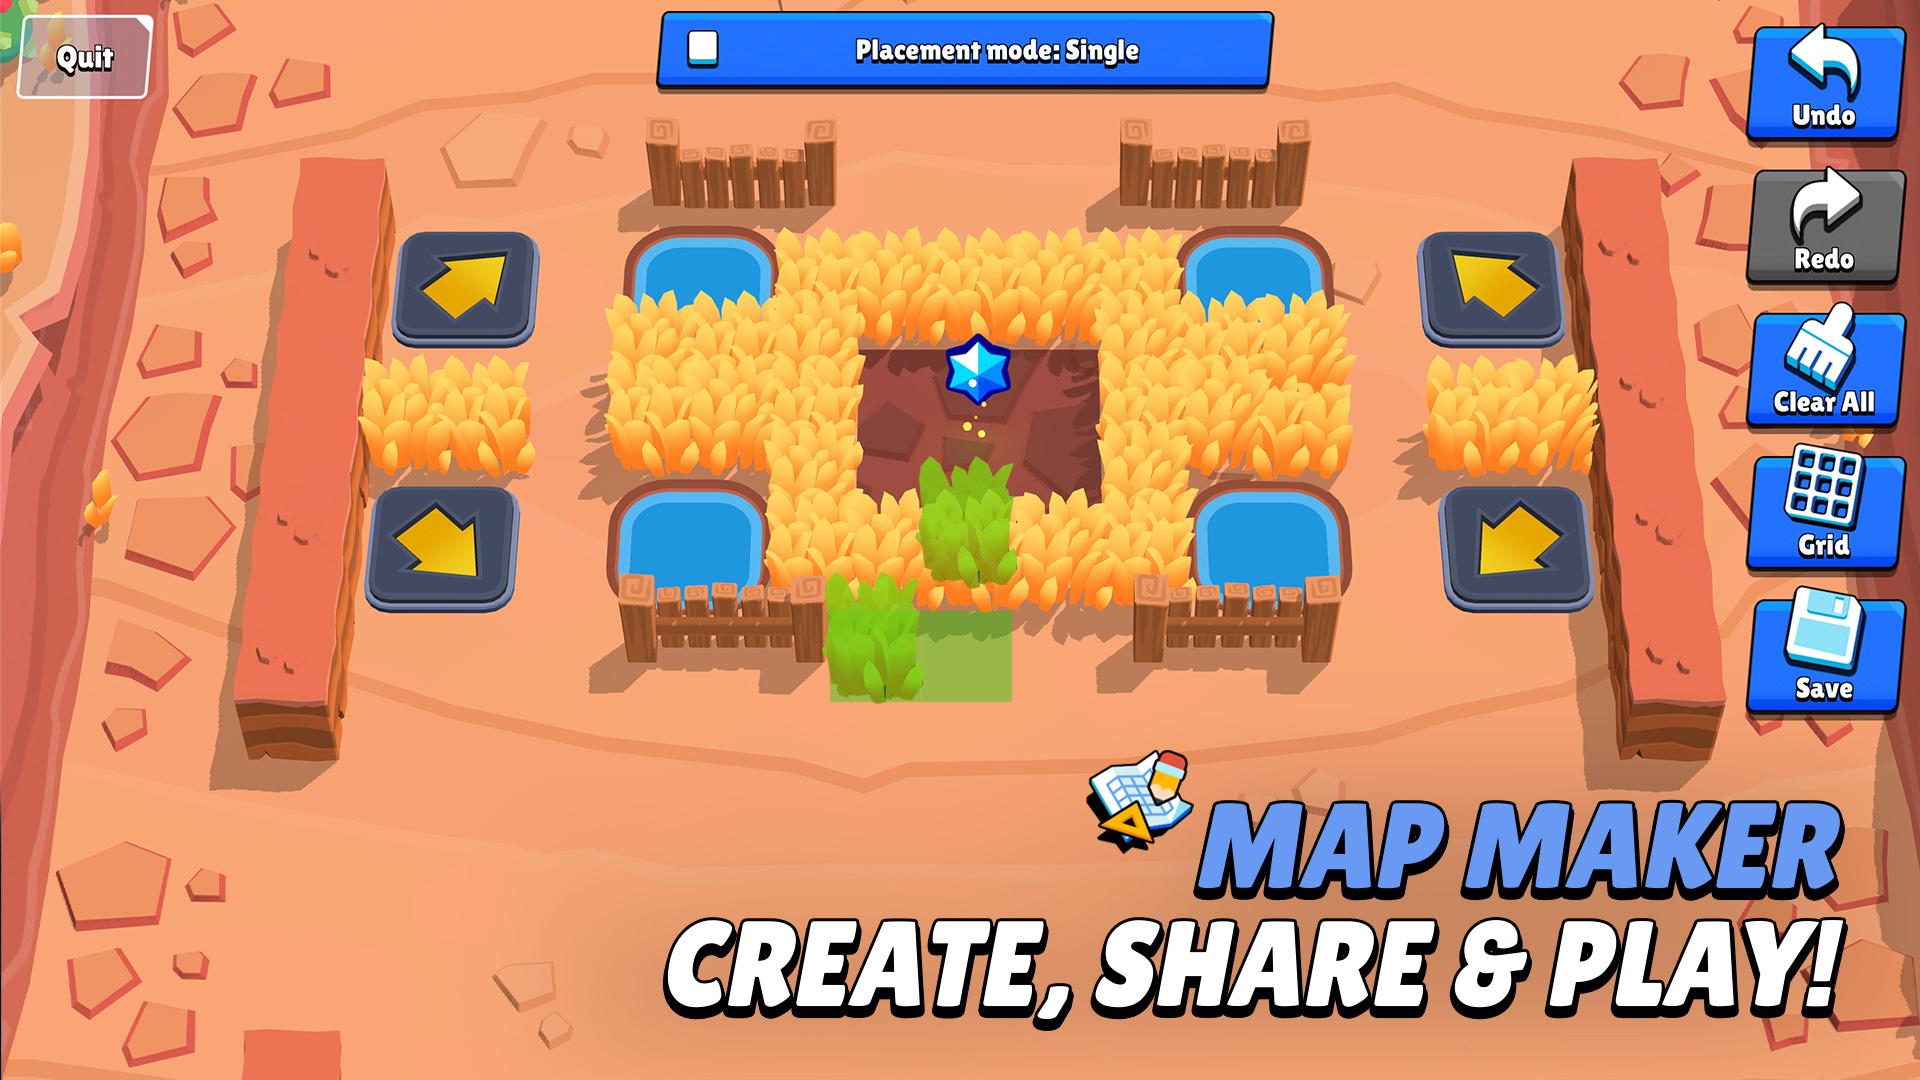 Brawl Stars Apk Download Pick Up Your Hero Characters In 3v3 Smash And Grab Mode Brock Shelly Jessie And Barley - apkpure brawl stars download